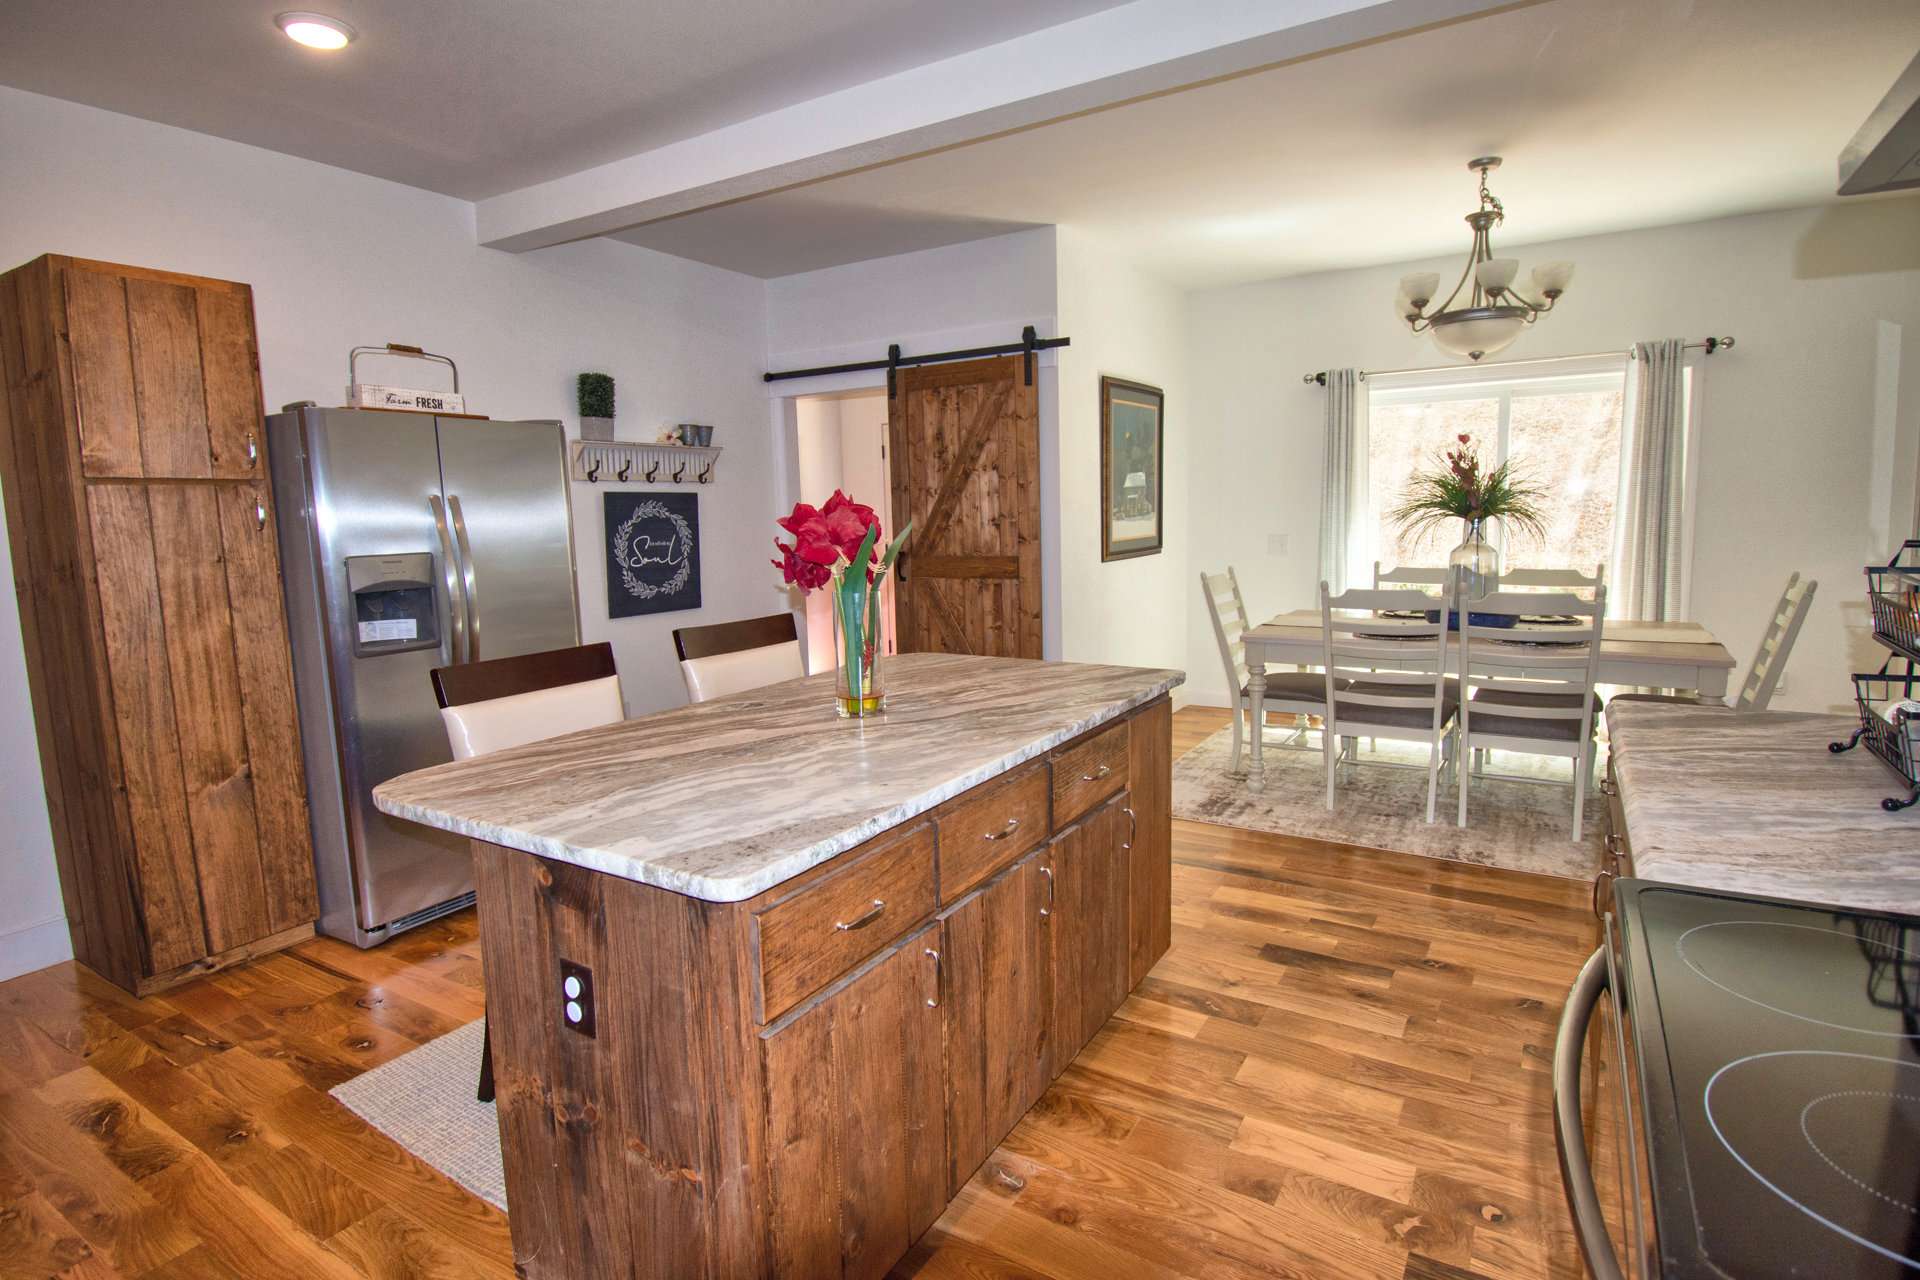 You will appreciate the work and storage space in the  kitchen area with granite counter tops.